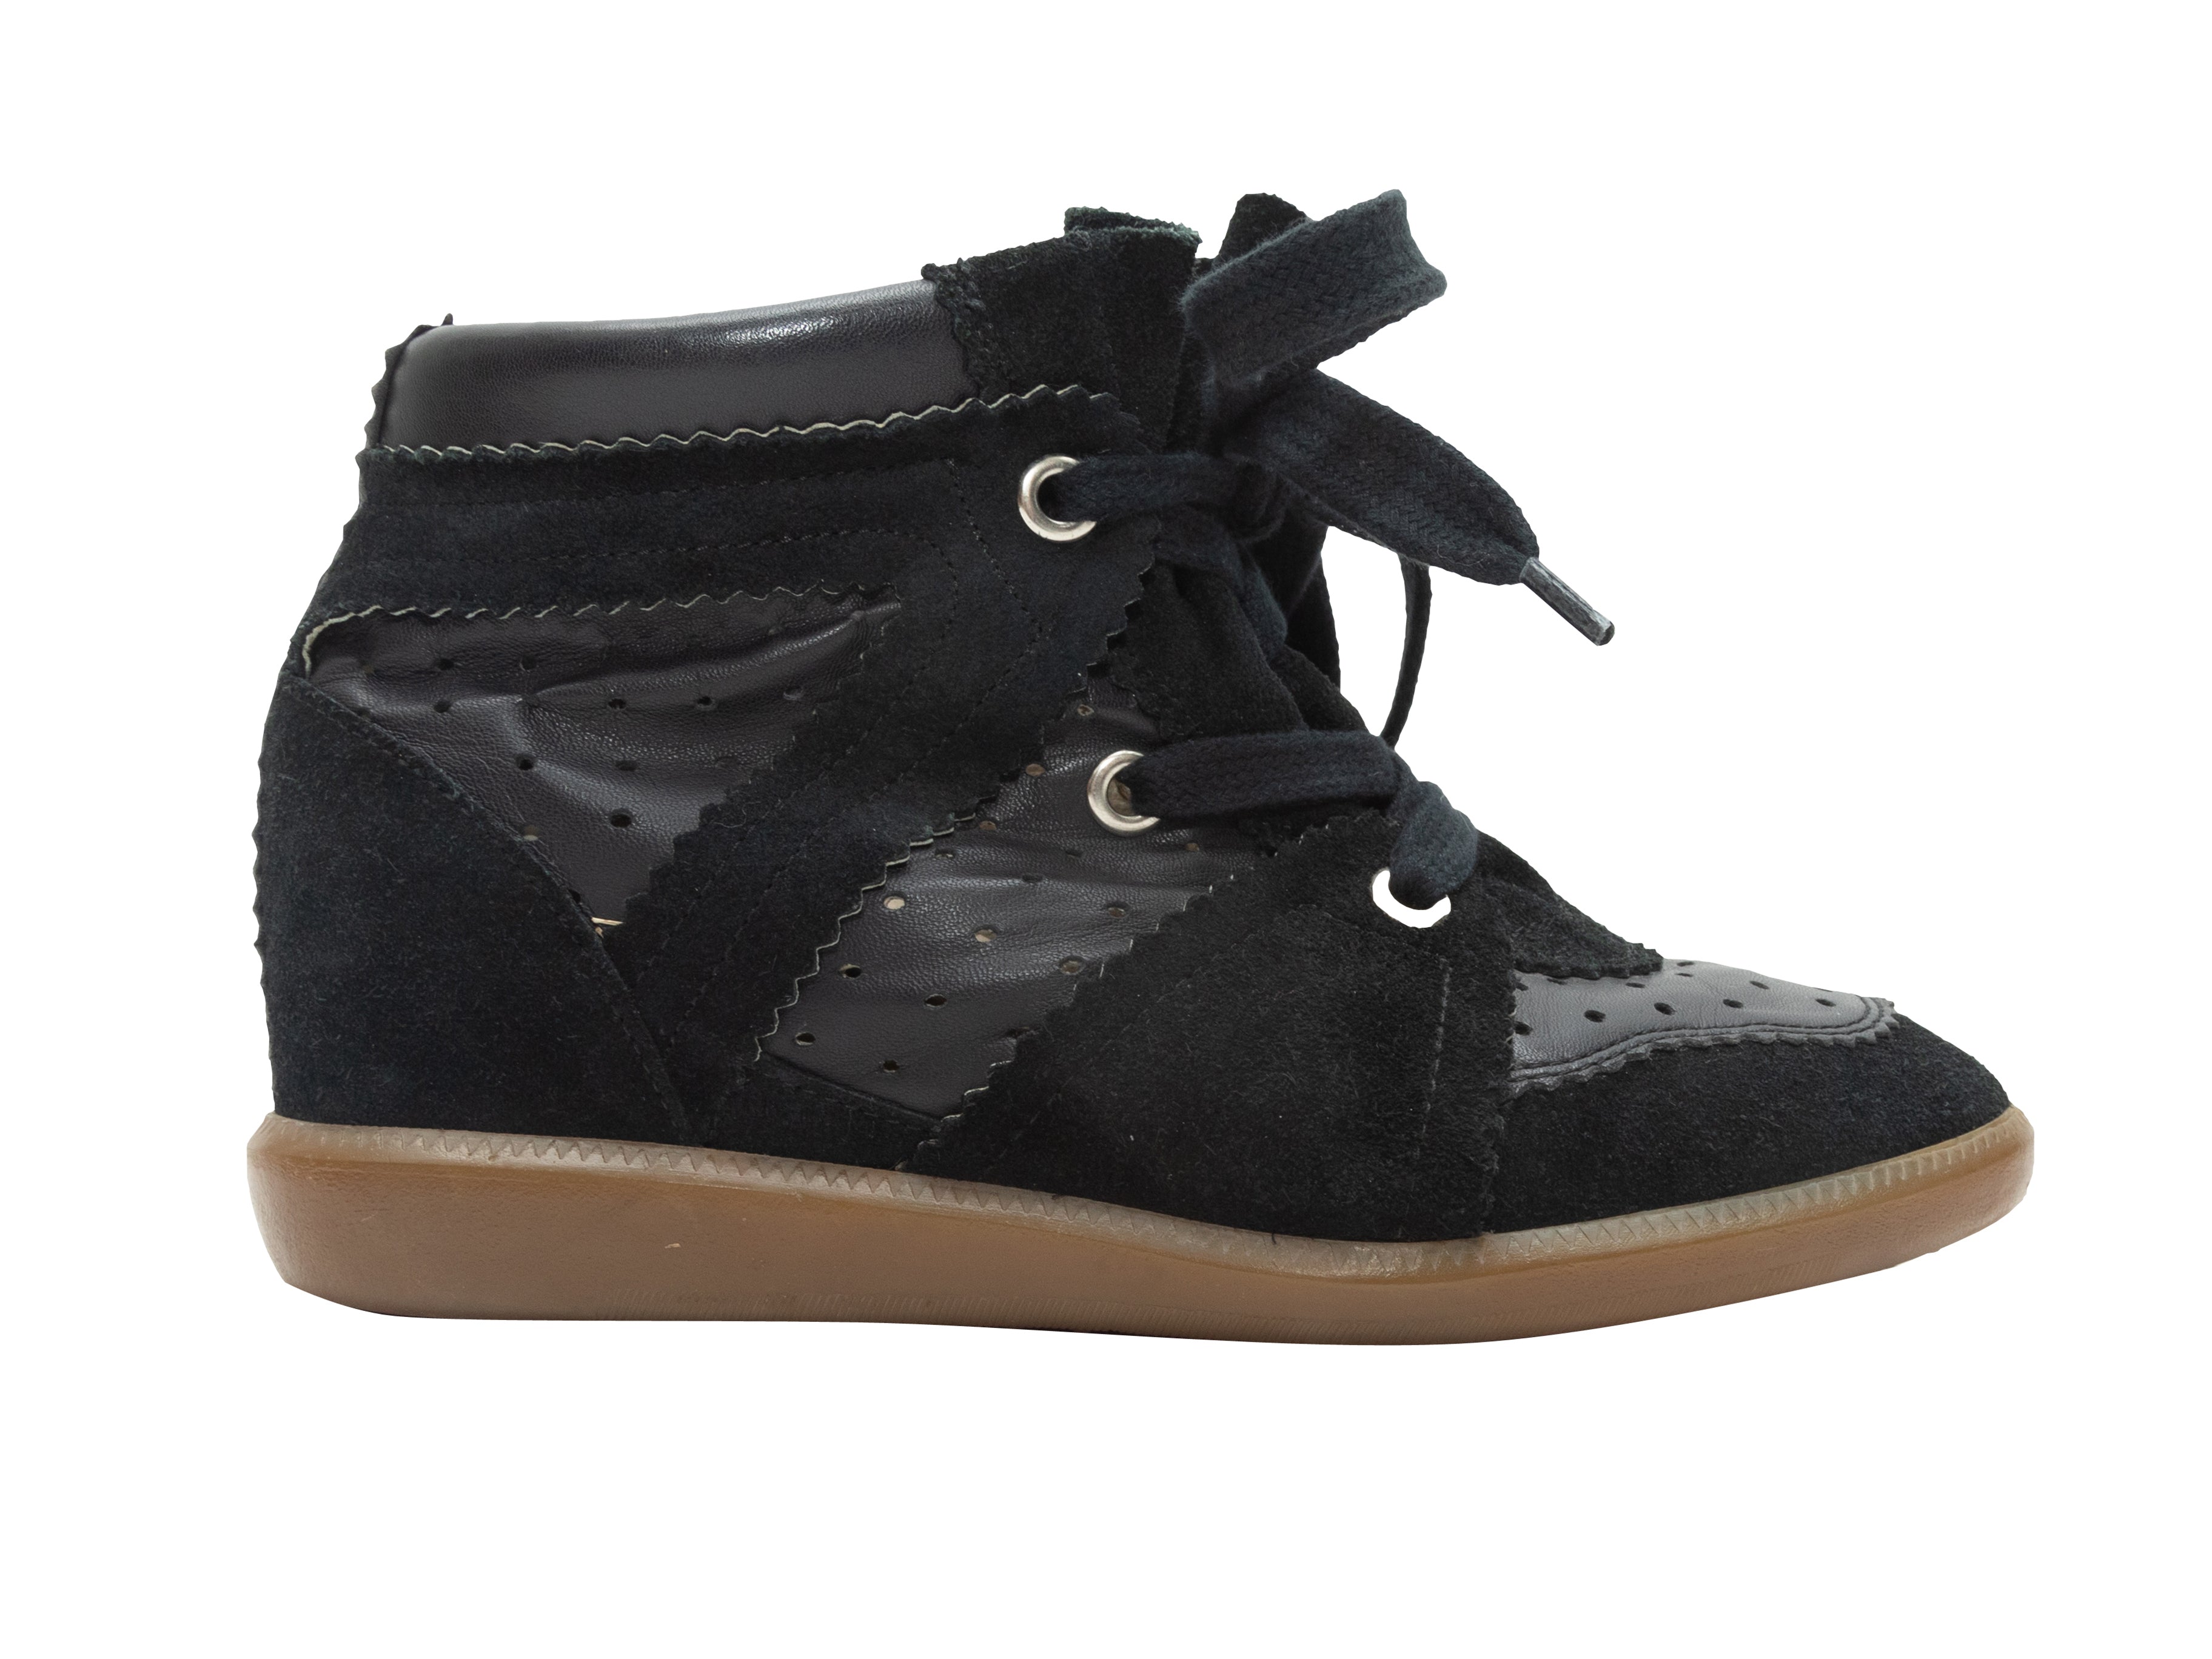 ISABEL MARANT Balskee Leather And Suede High-Top Wedge Sneakers in Neutrals  | Endource